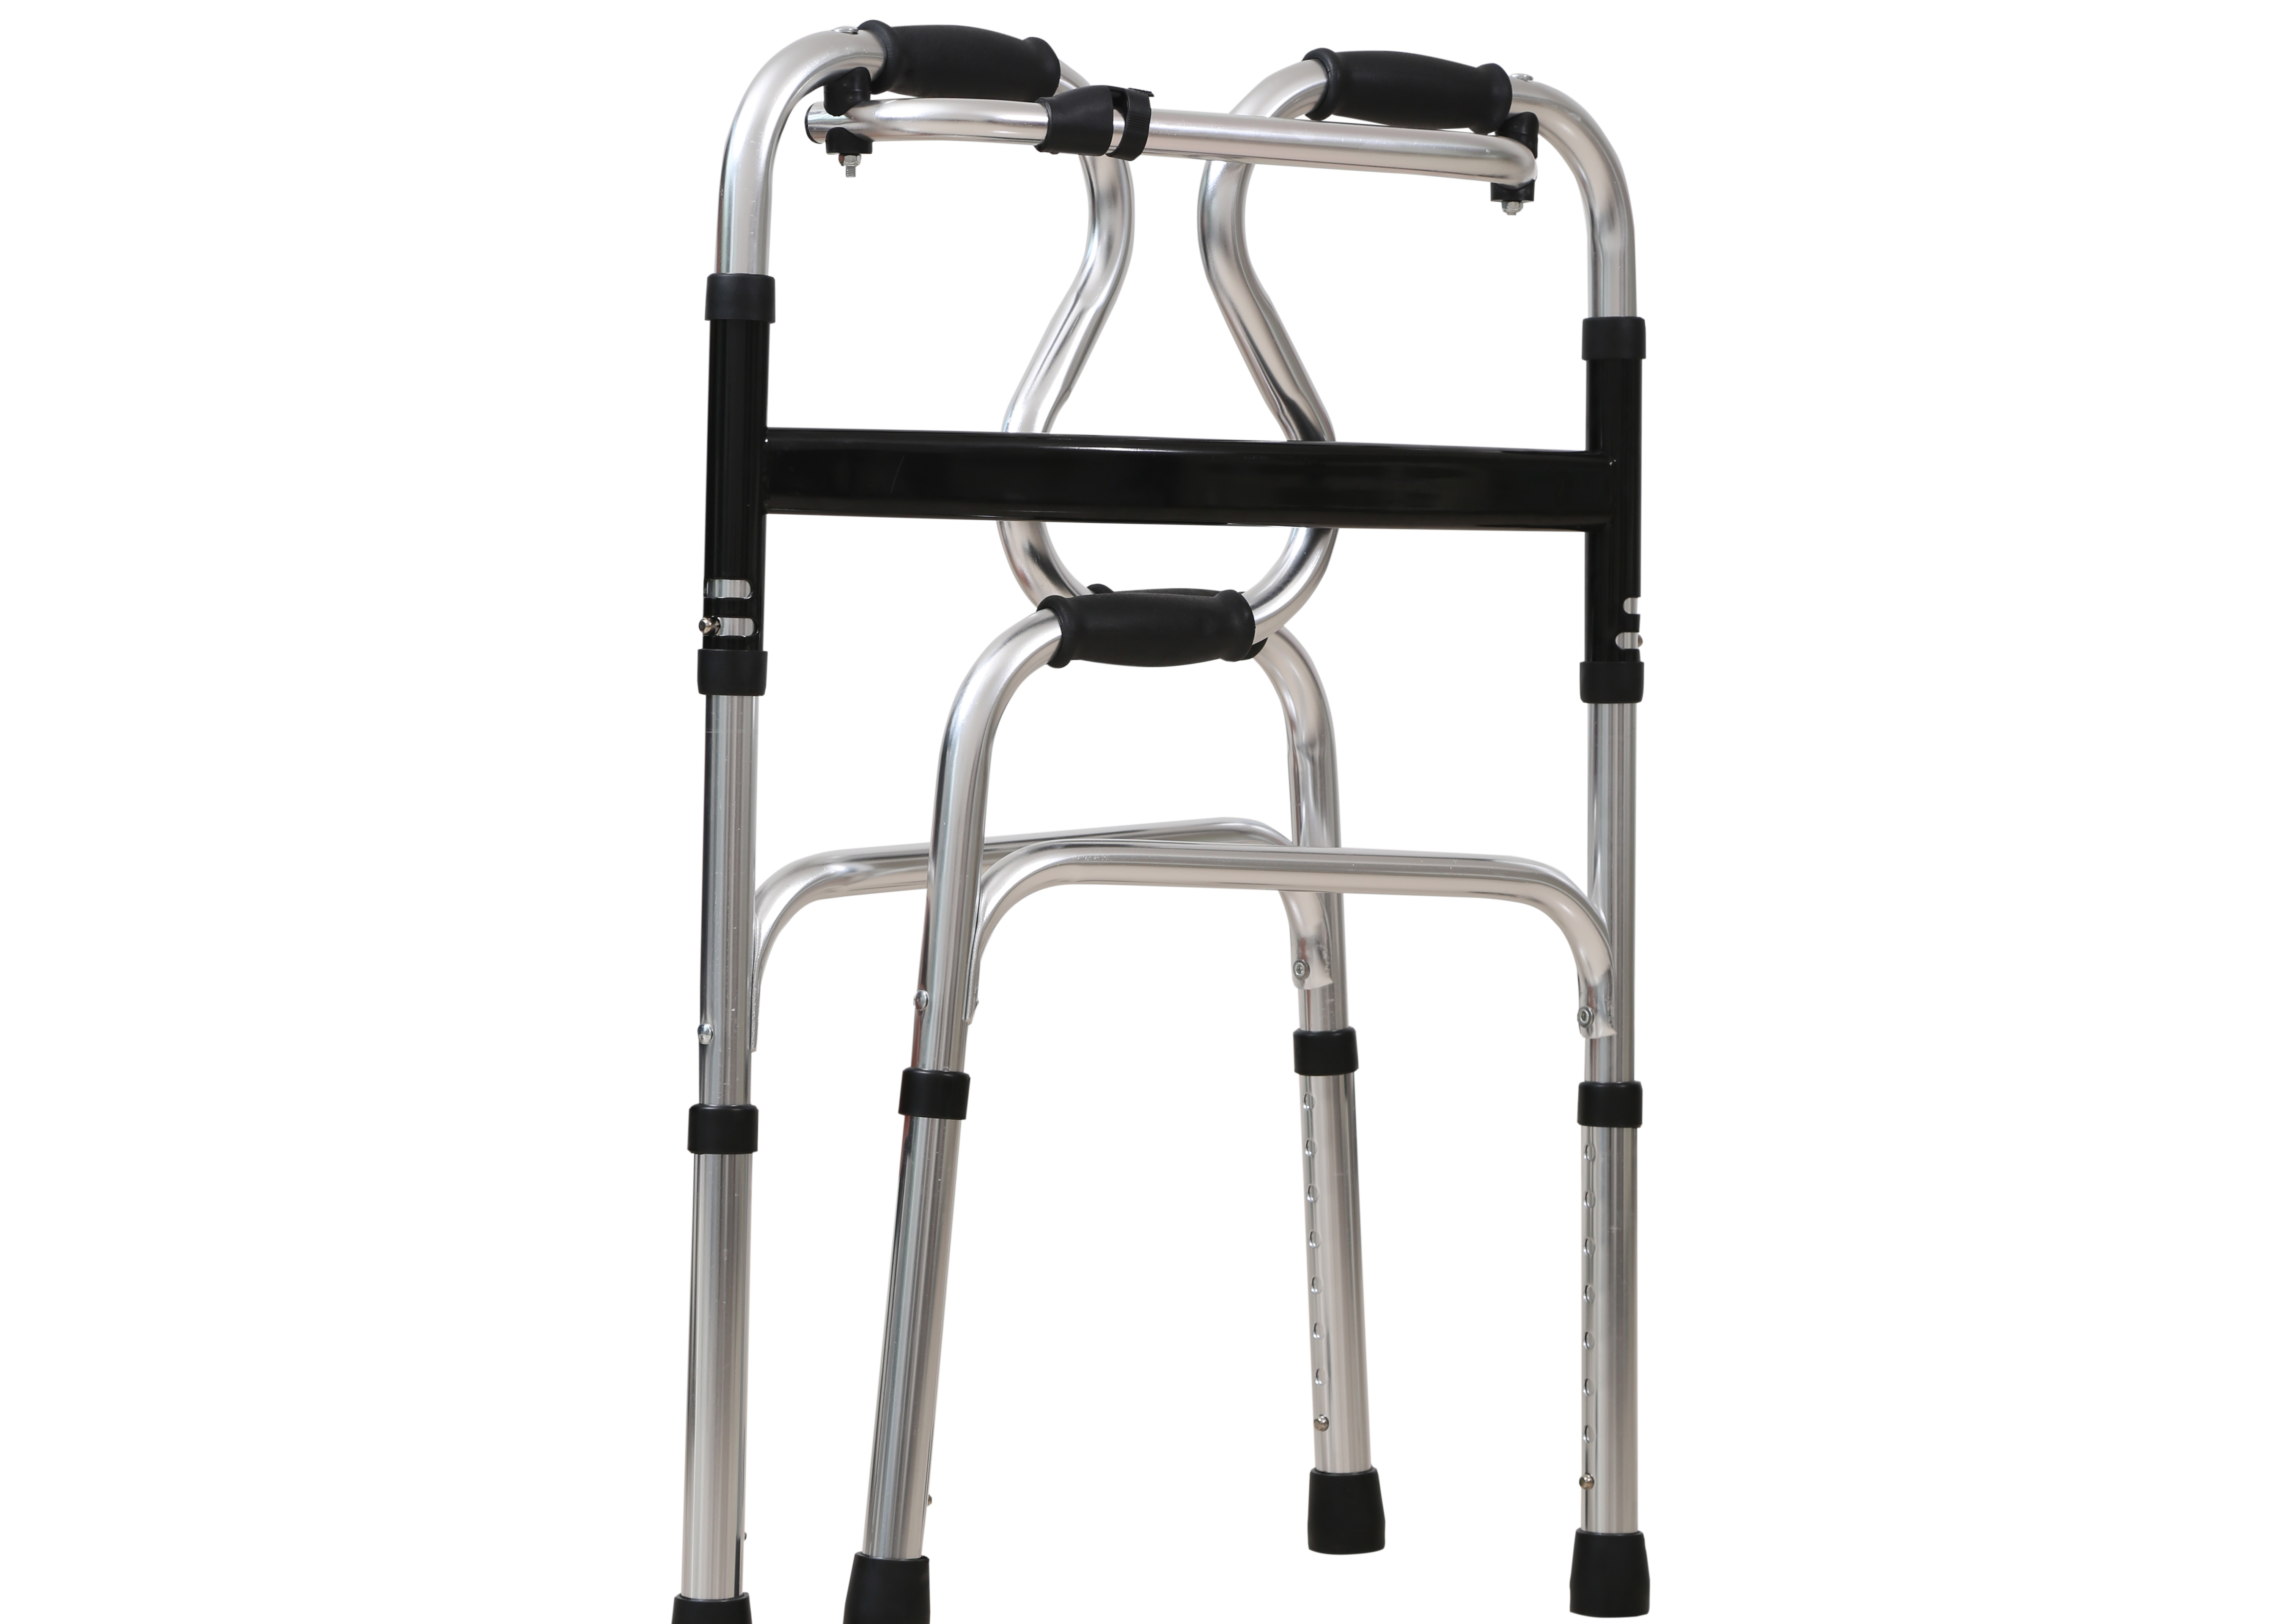 Double side armrest walkers knee walk for the aged